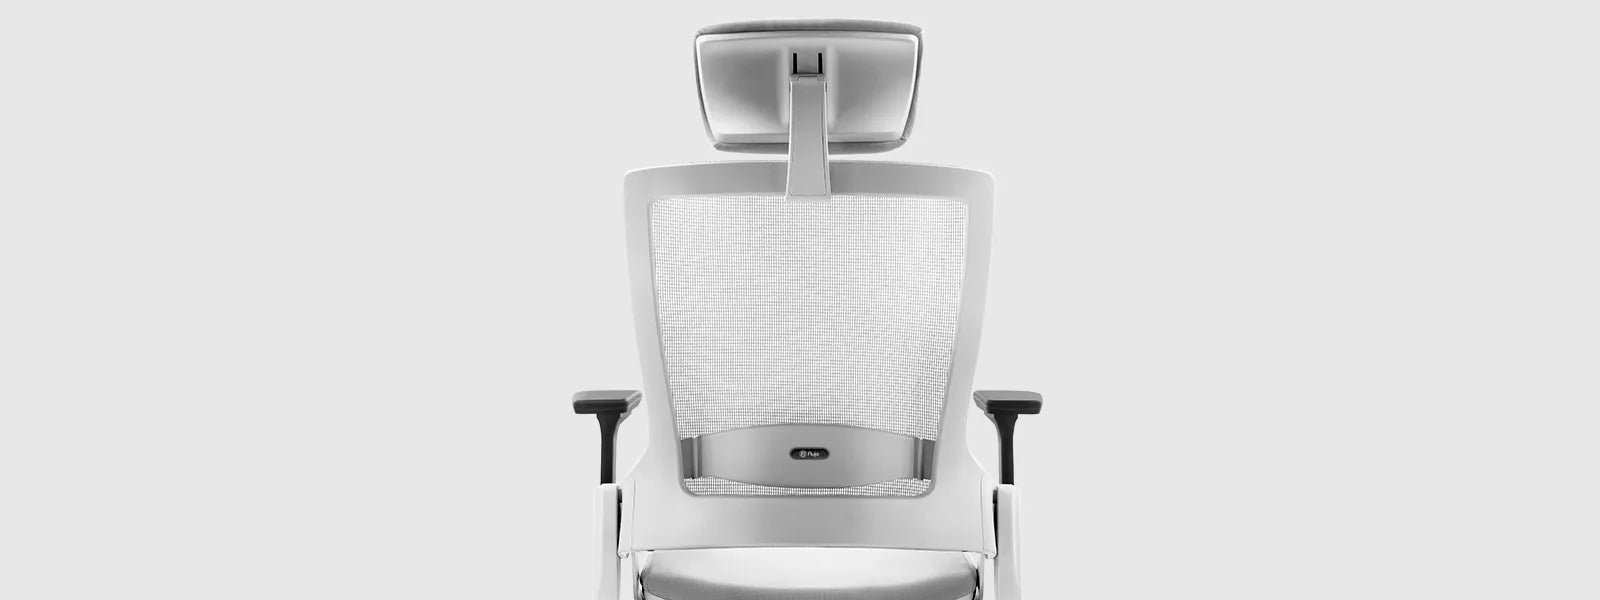 Detailed view of the Flujo Angulo Chair highlighting the adjustable headrest and mesh back design for optimal comfort.